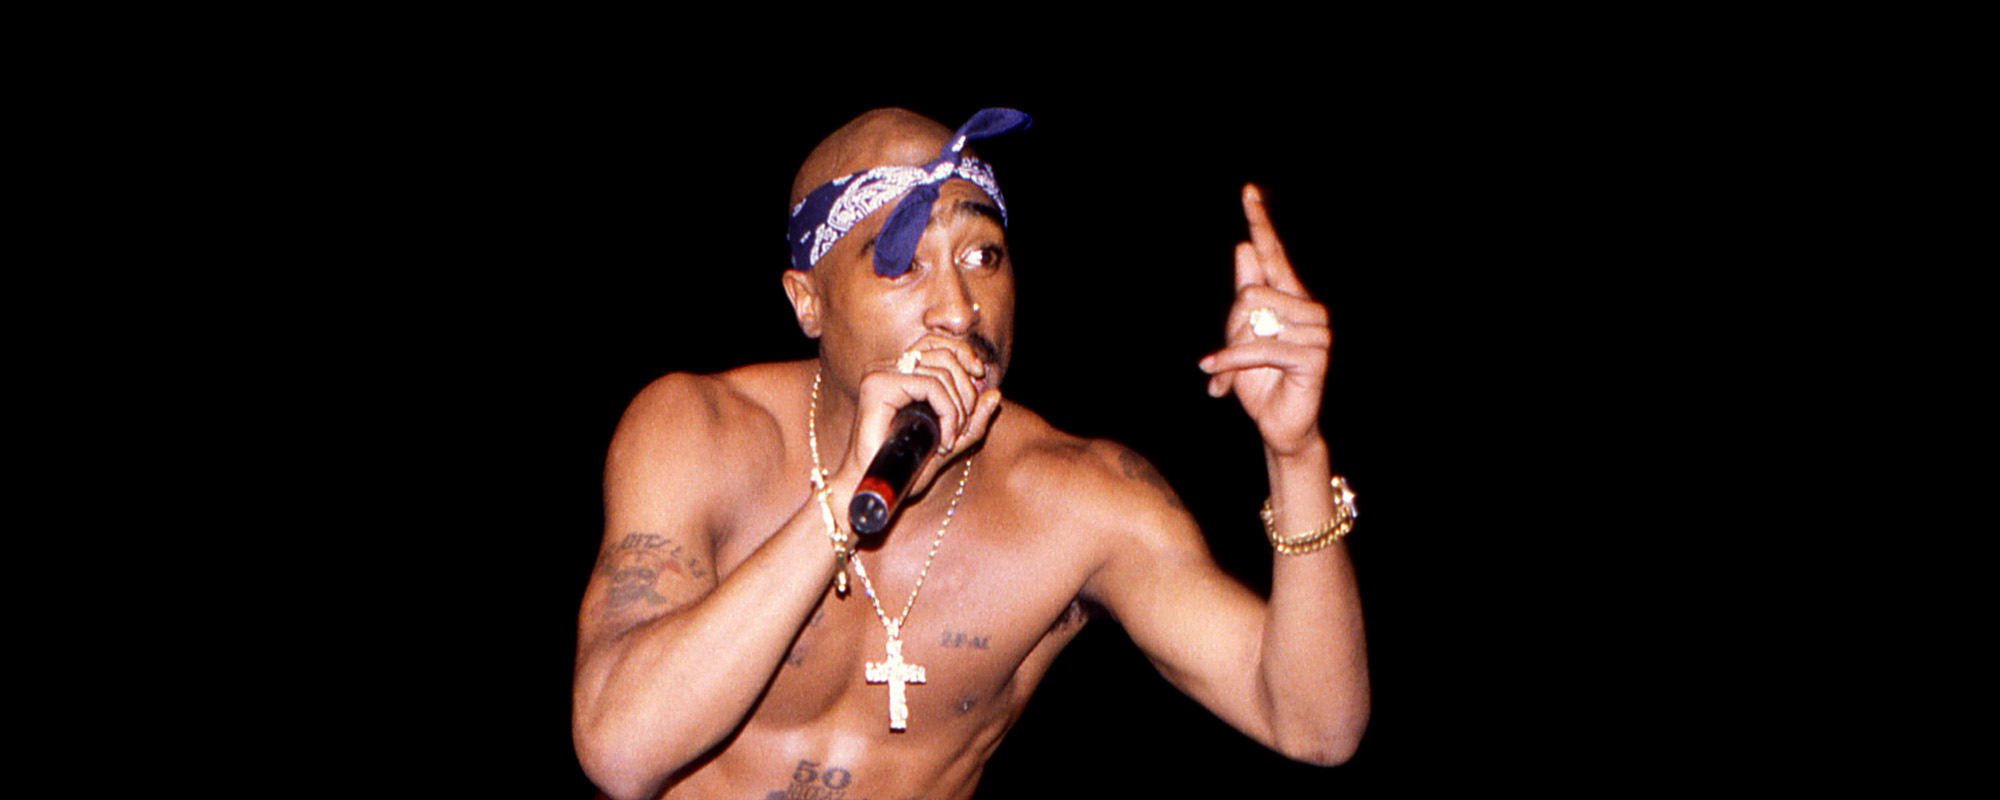 We Asked AI to Come Up with a Duet for Eminem and Tupac—See the Results